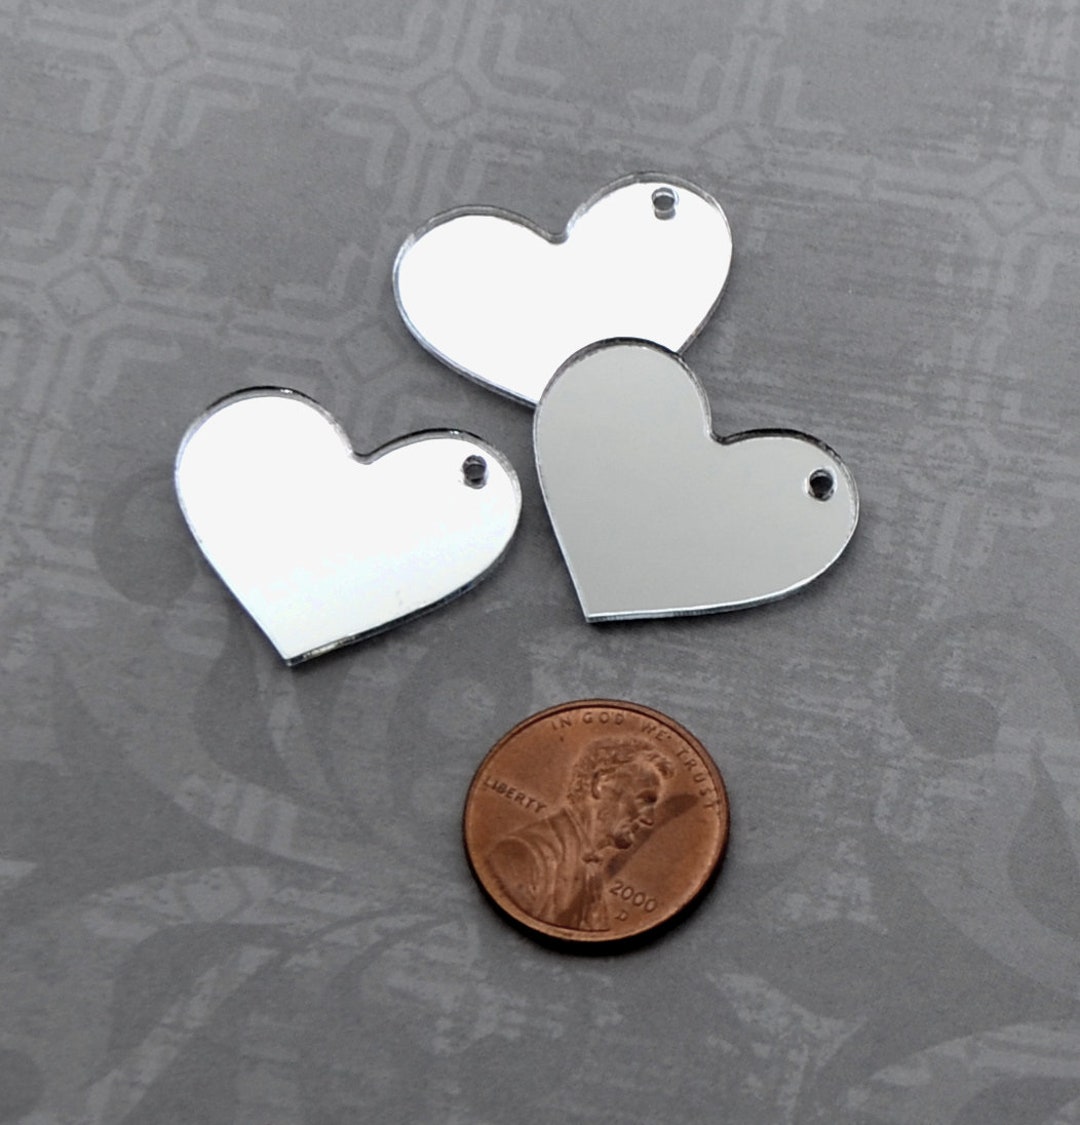 SILVER MIRROR HEART Charms Set of 3 - Laser Cut Acrylic Charms